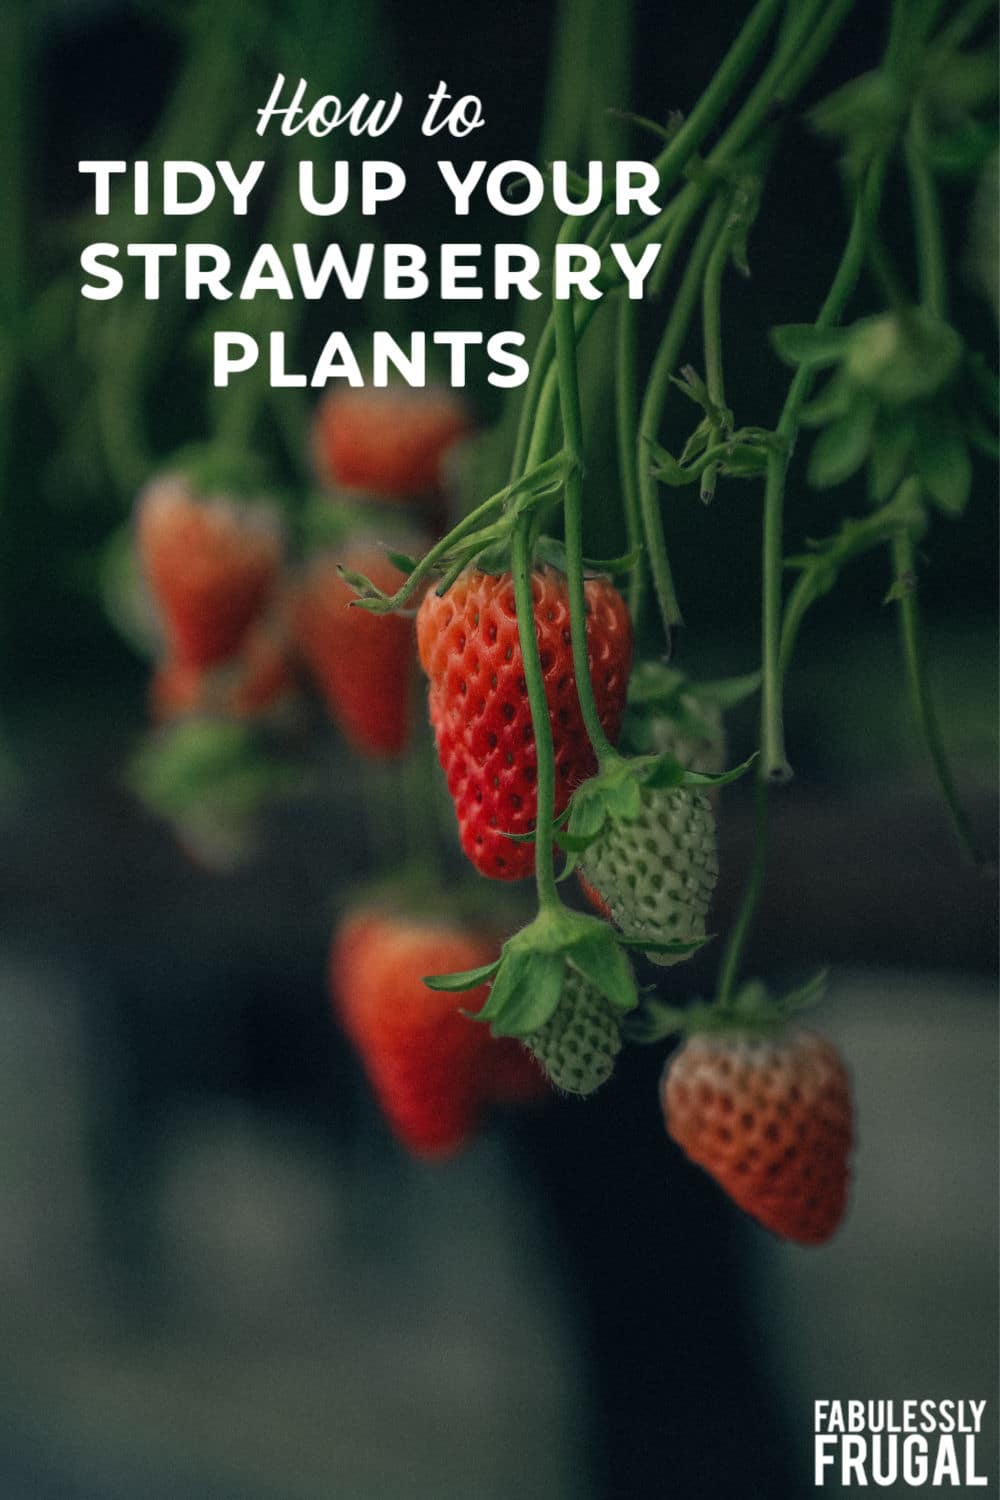 Tidying up strawberry plants